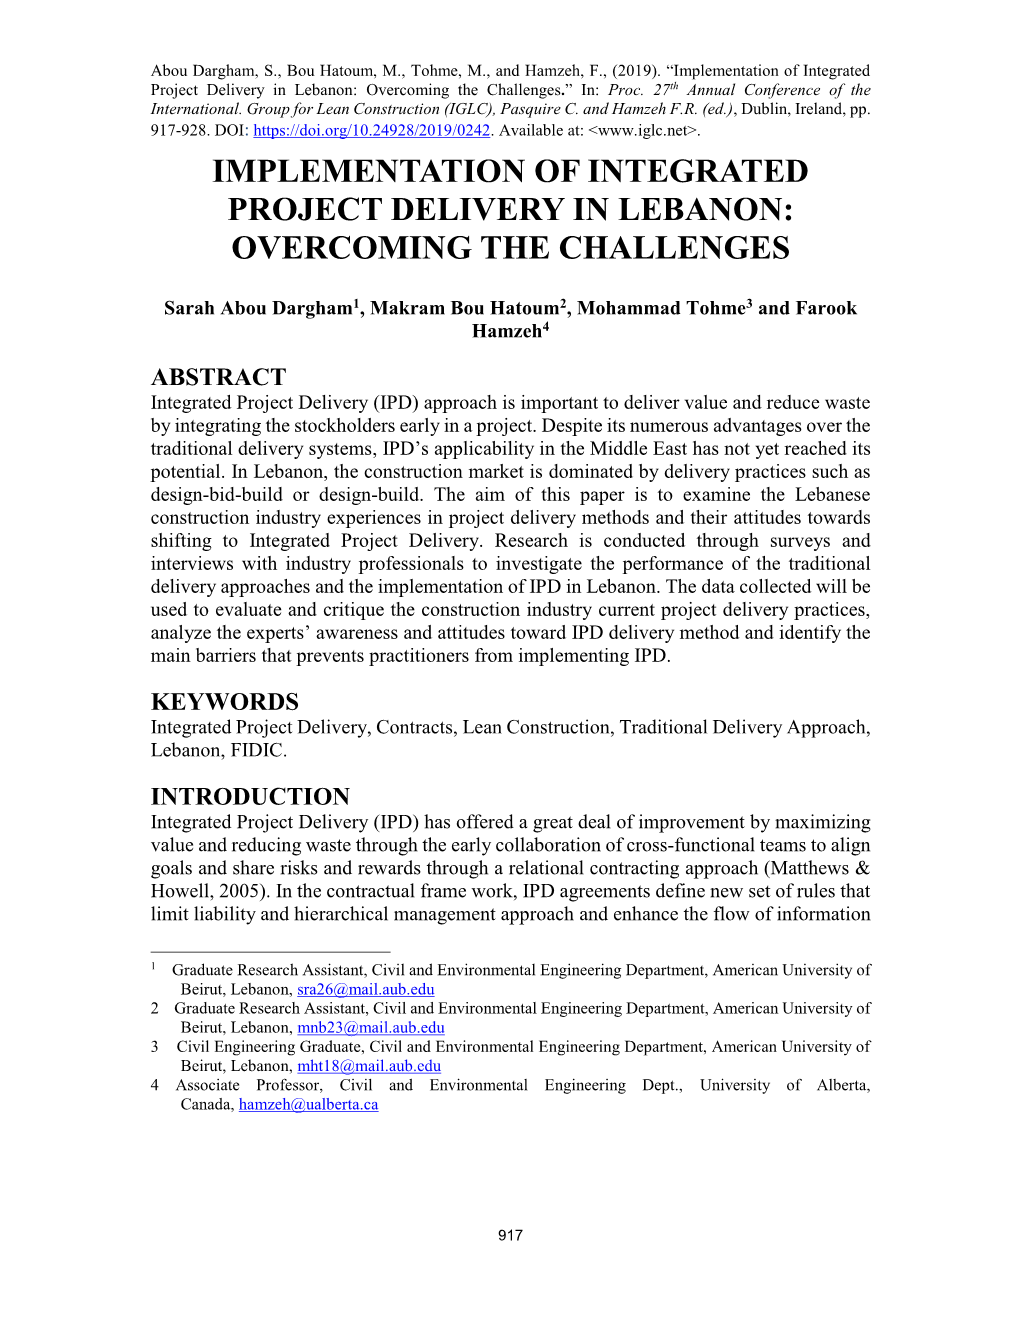 Implementation of Integrated Project Delivery in Lebanon: Overcoming the Challenges.” In: Proc